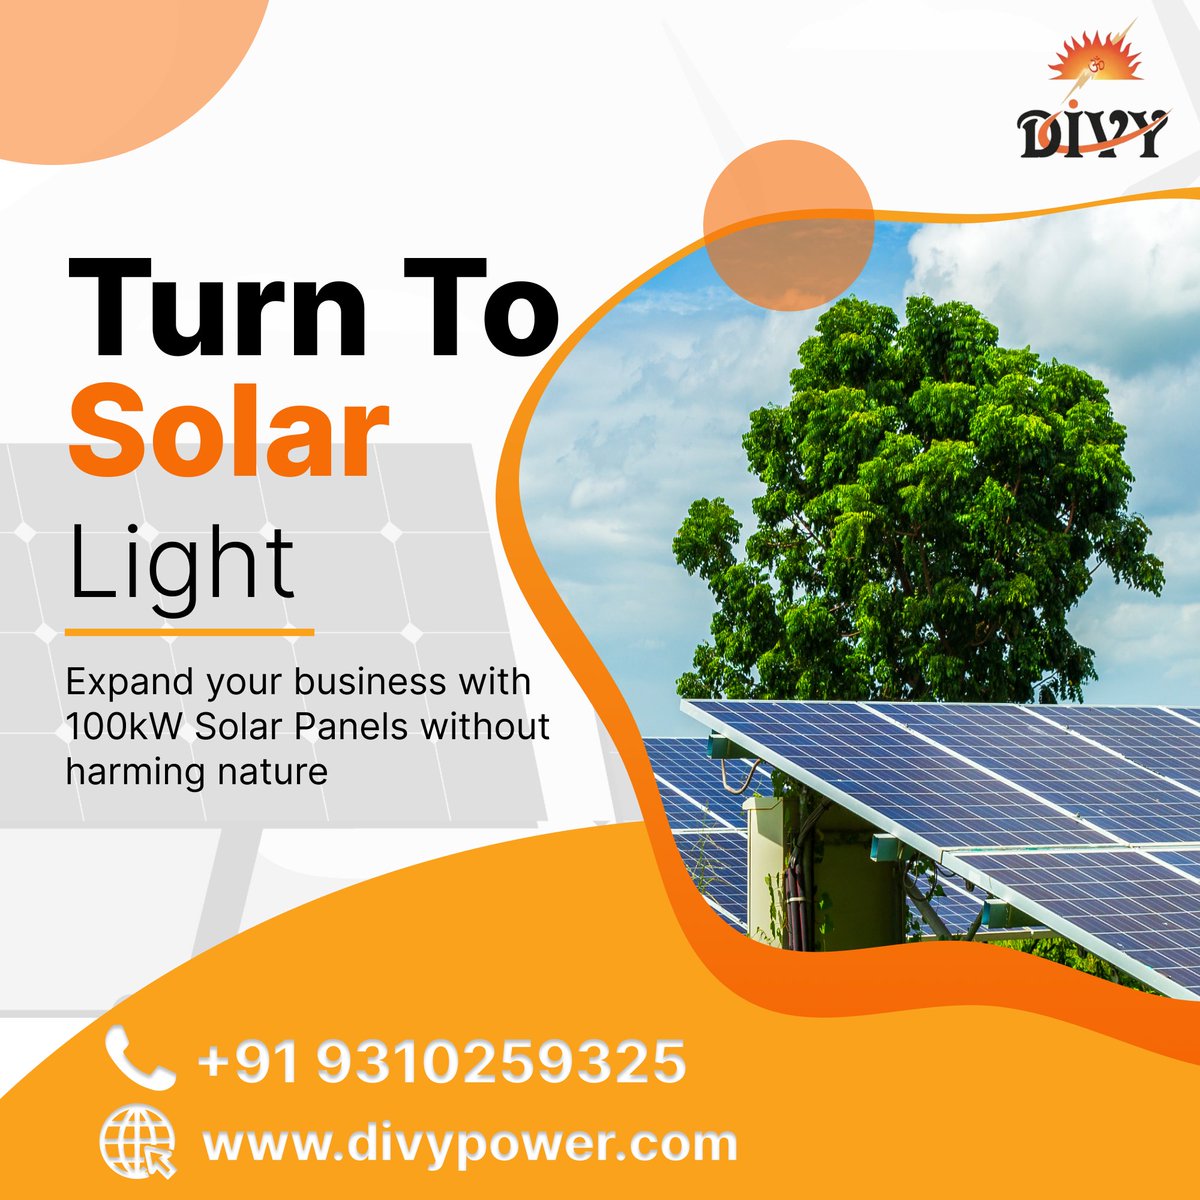 Break free from grid chains, choose sunshine's gains! Power your world, clean and bright, solar whispers, 'Future's light.' ☀️✊ #solarevolution #turntosolar #solarillumination #lightupwithsolar #switchtosolar #solarbrighteninglives #shinewithsolar #solarlight #solarswitch #solar